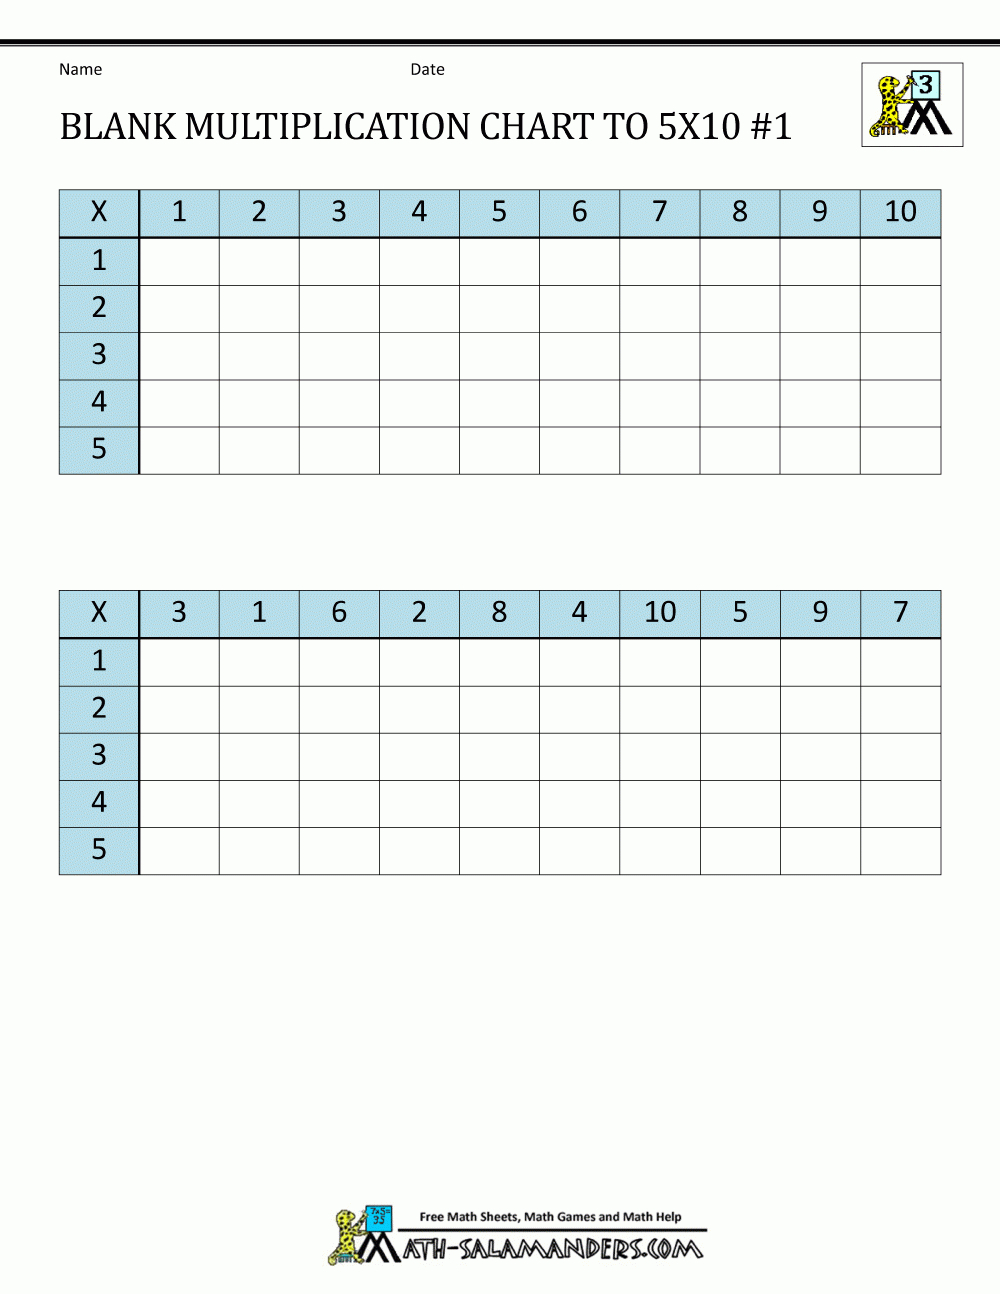 Blank Multiplication Chart Up To 10X10 pertaining to Printable Multiplication Chart 0-10